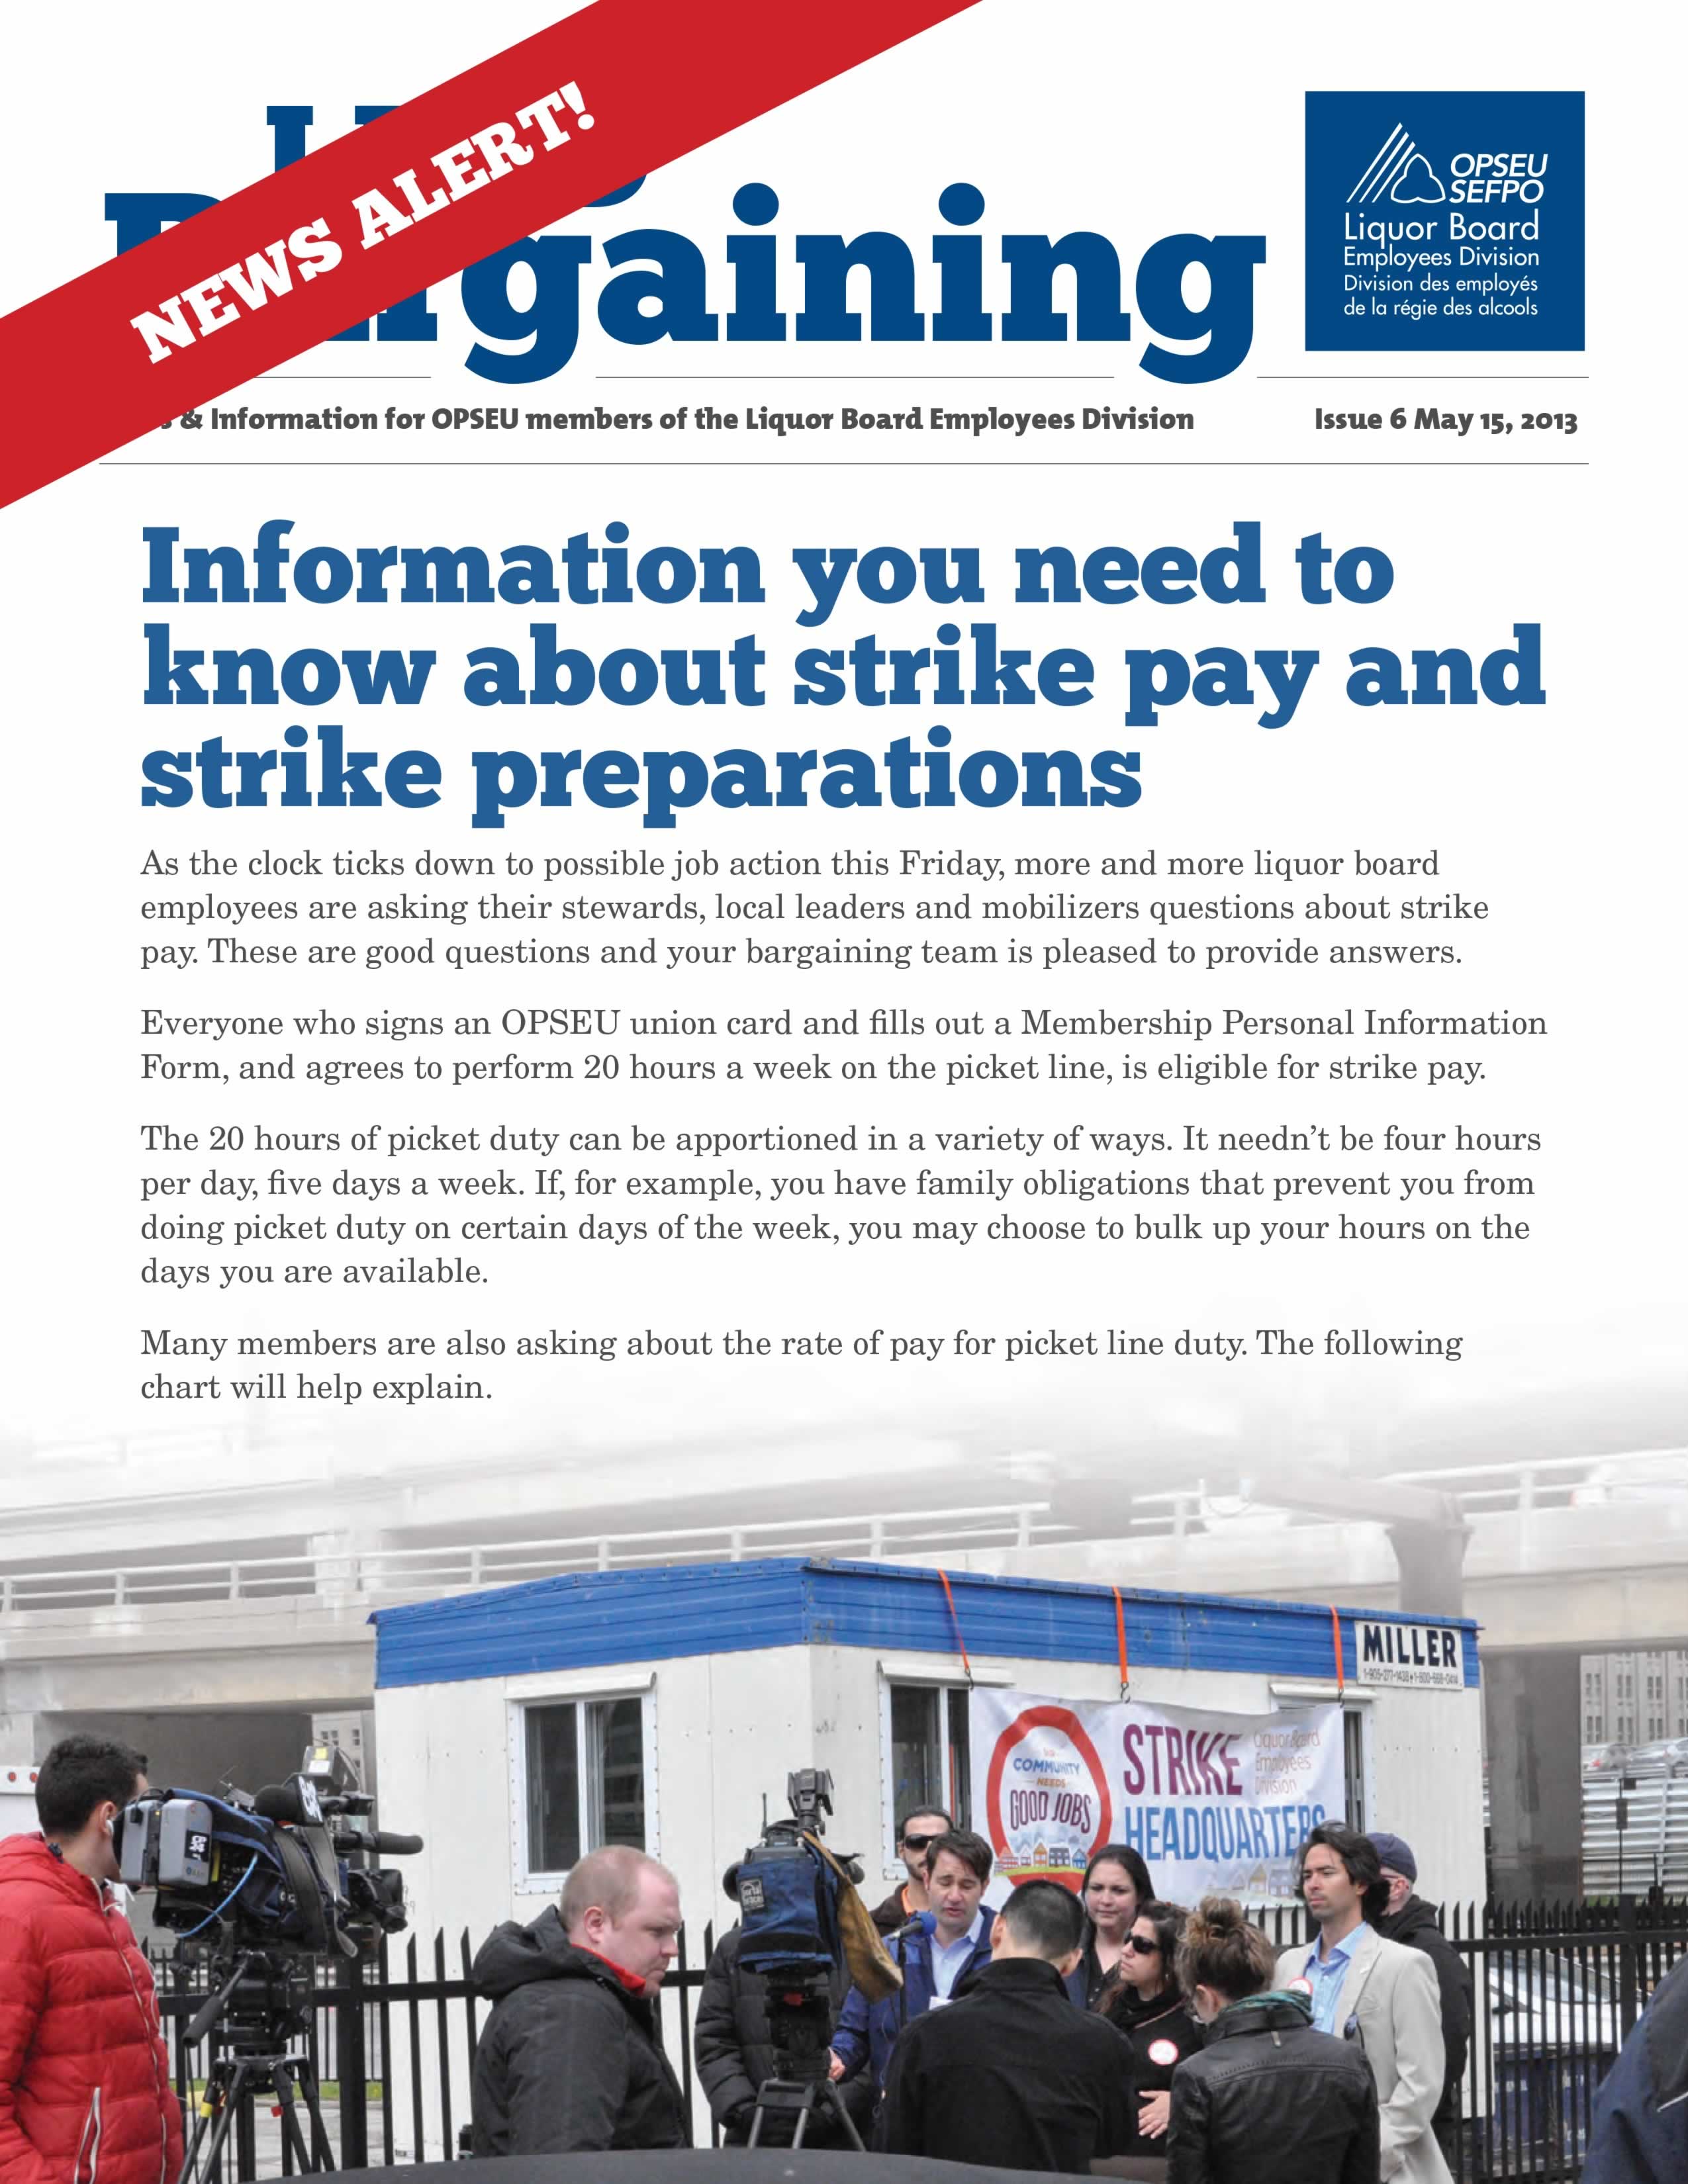 2013 Collective Bargaining: News Alert Issue #6